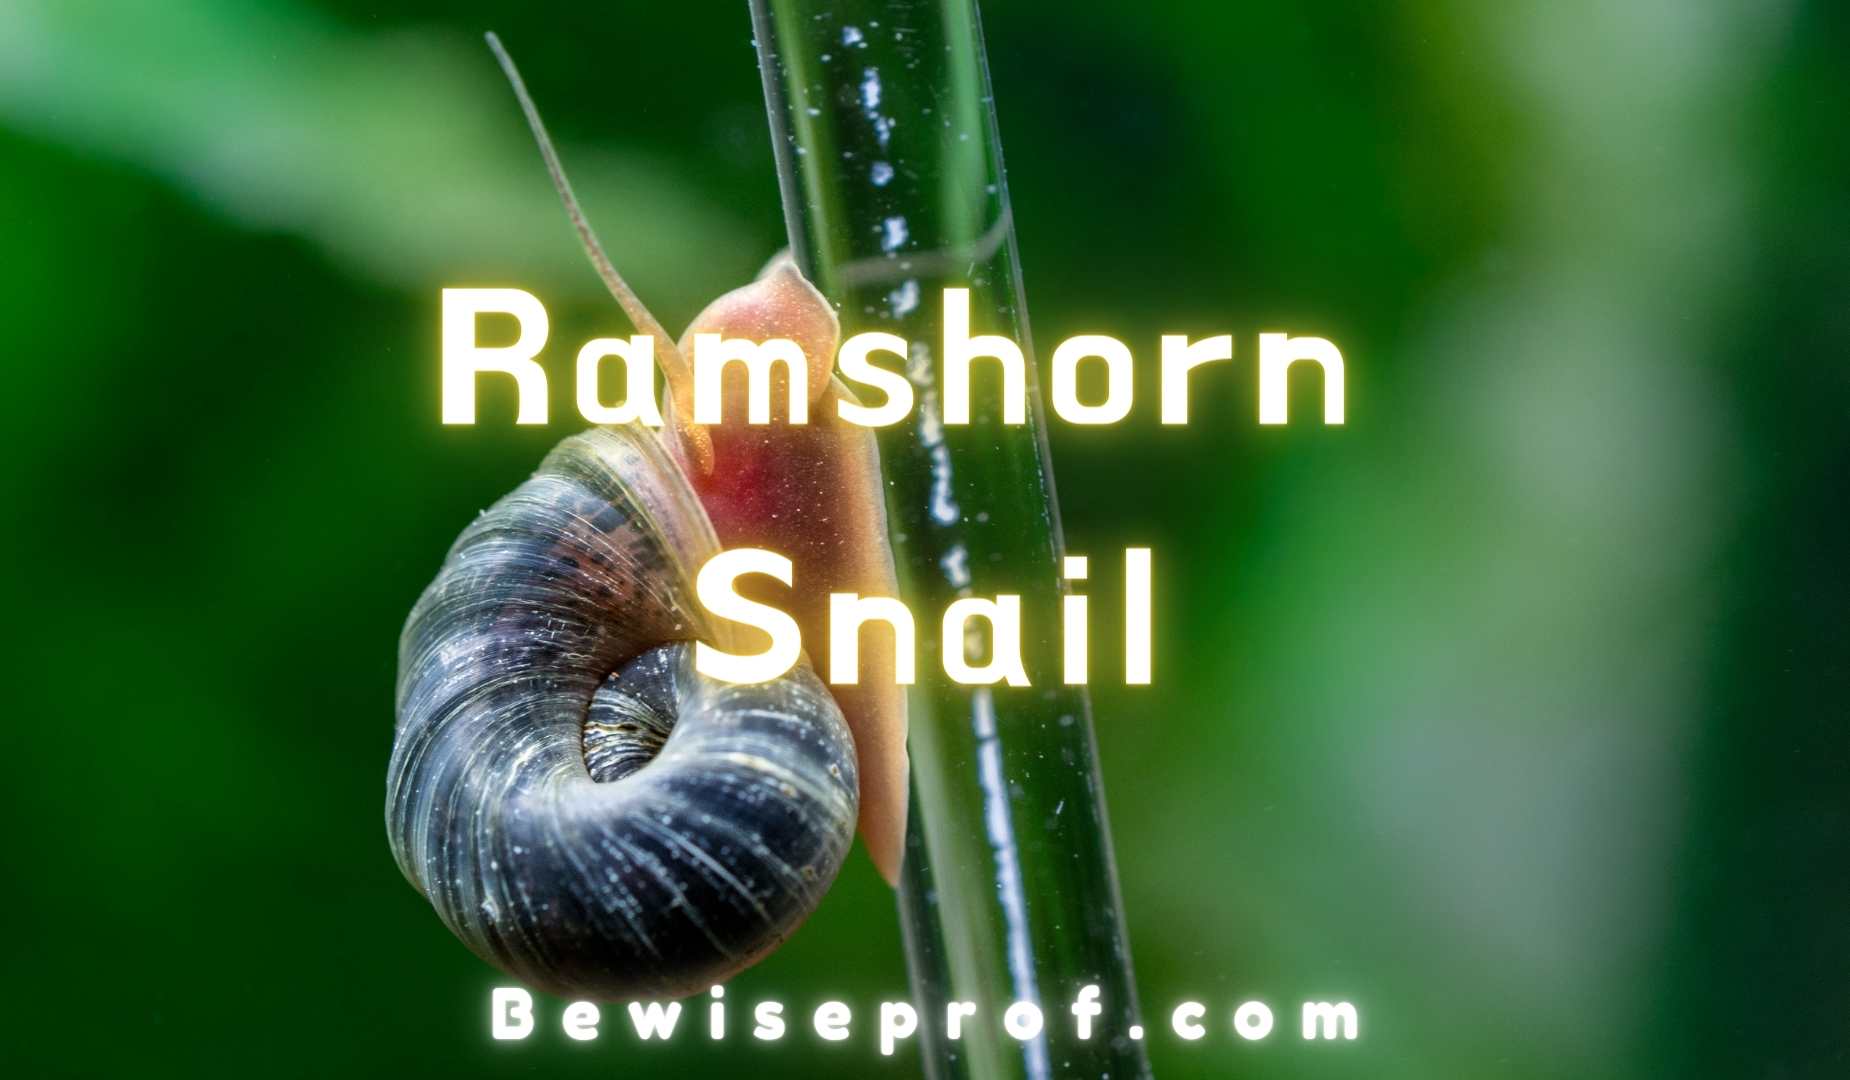 Mini Ramshorn Snail | How To Get Rid Of Ramshorn Snails